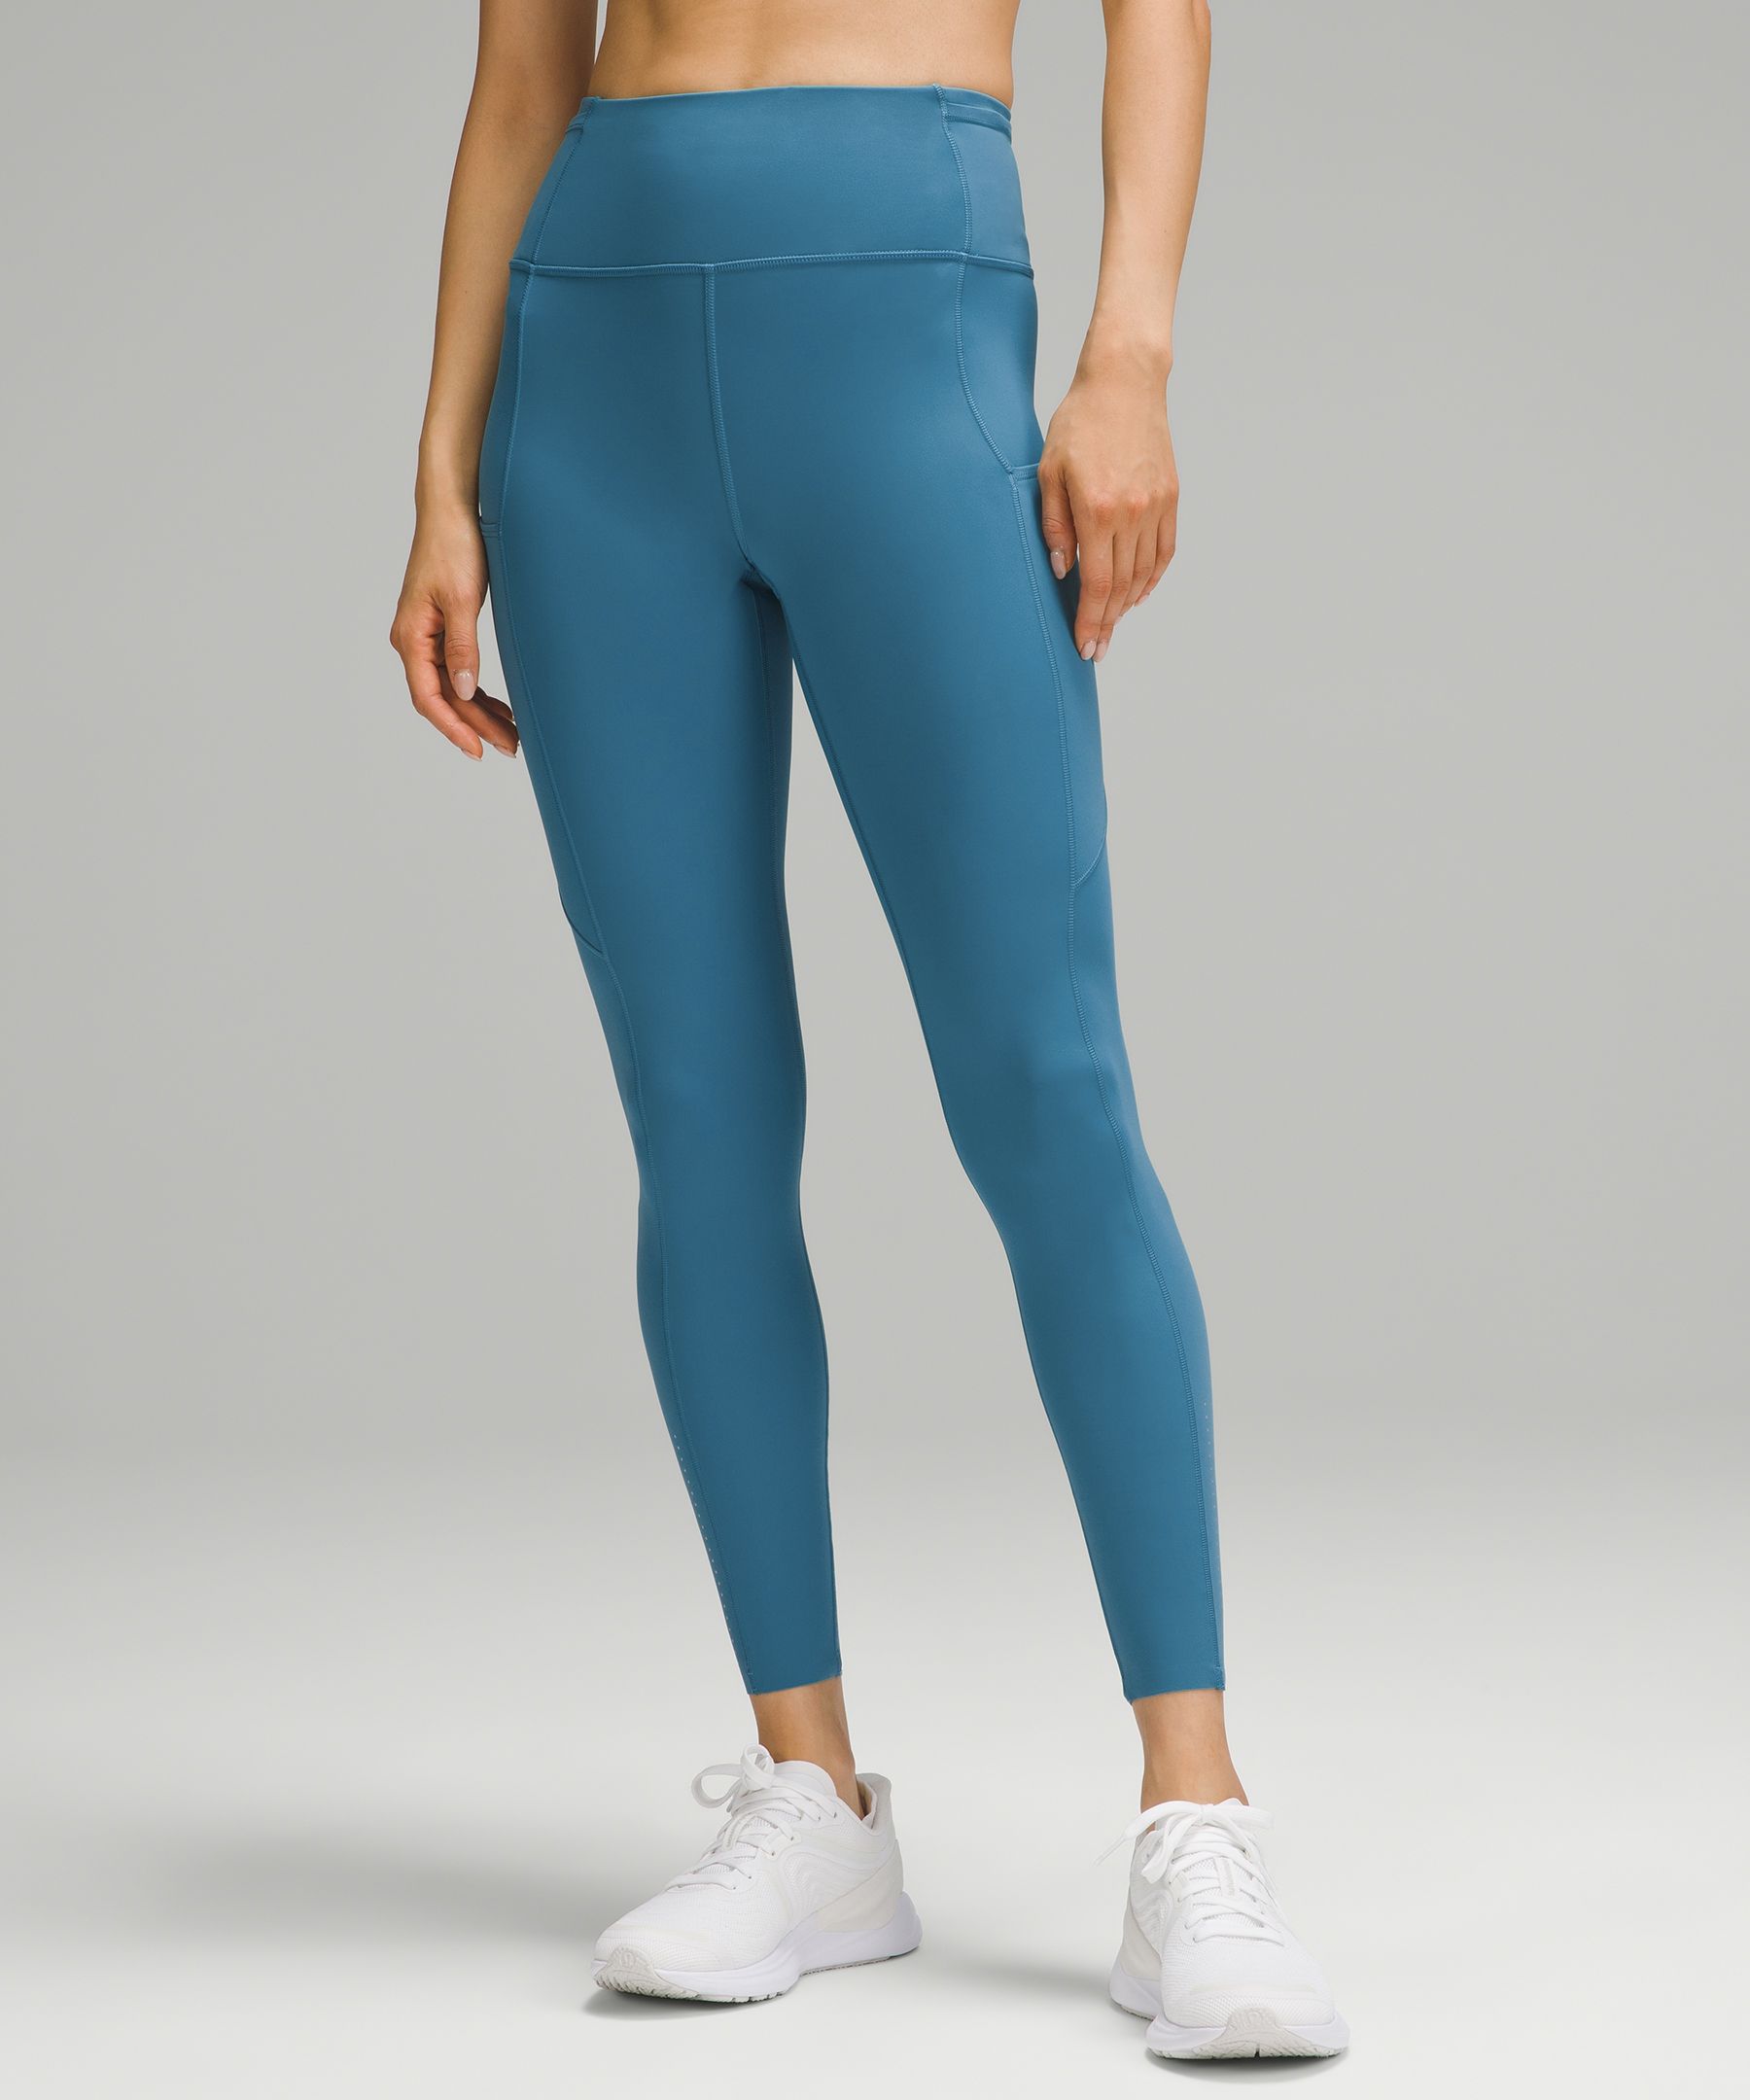 Fast and Free High-Rise Tight 24 Pockets